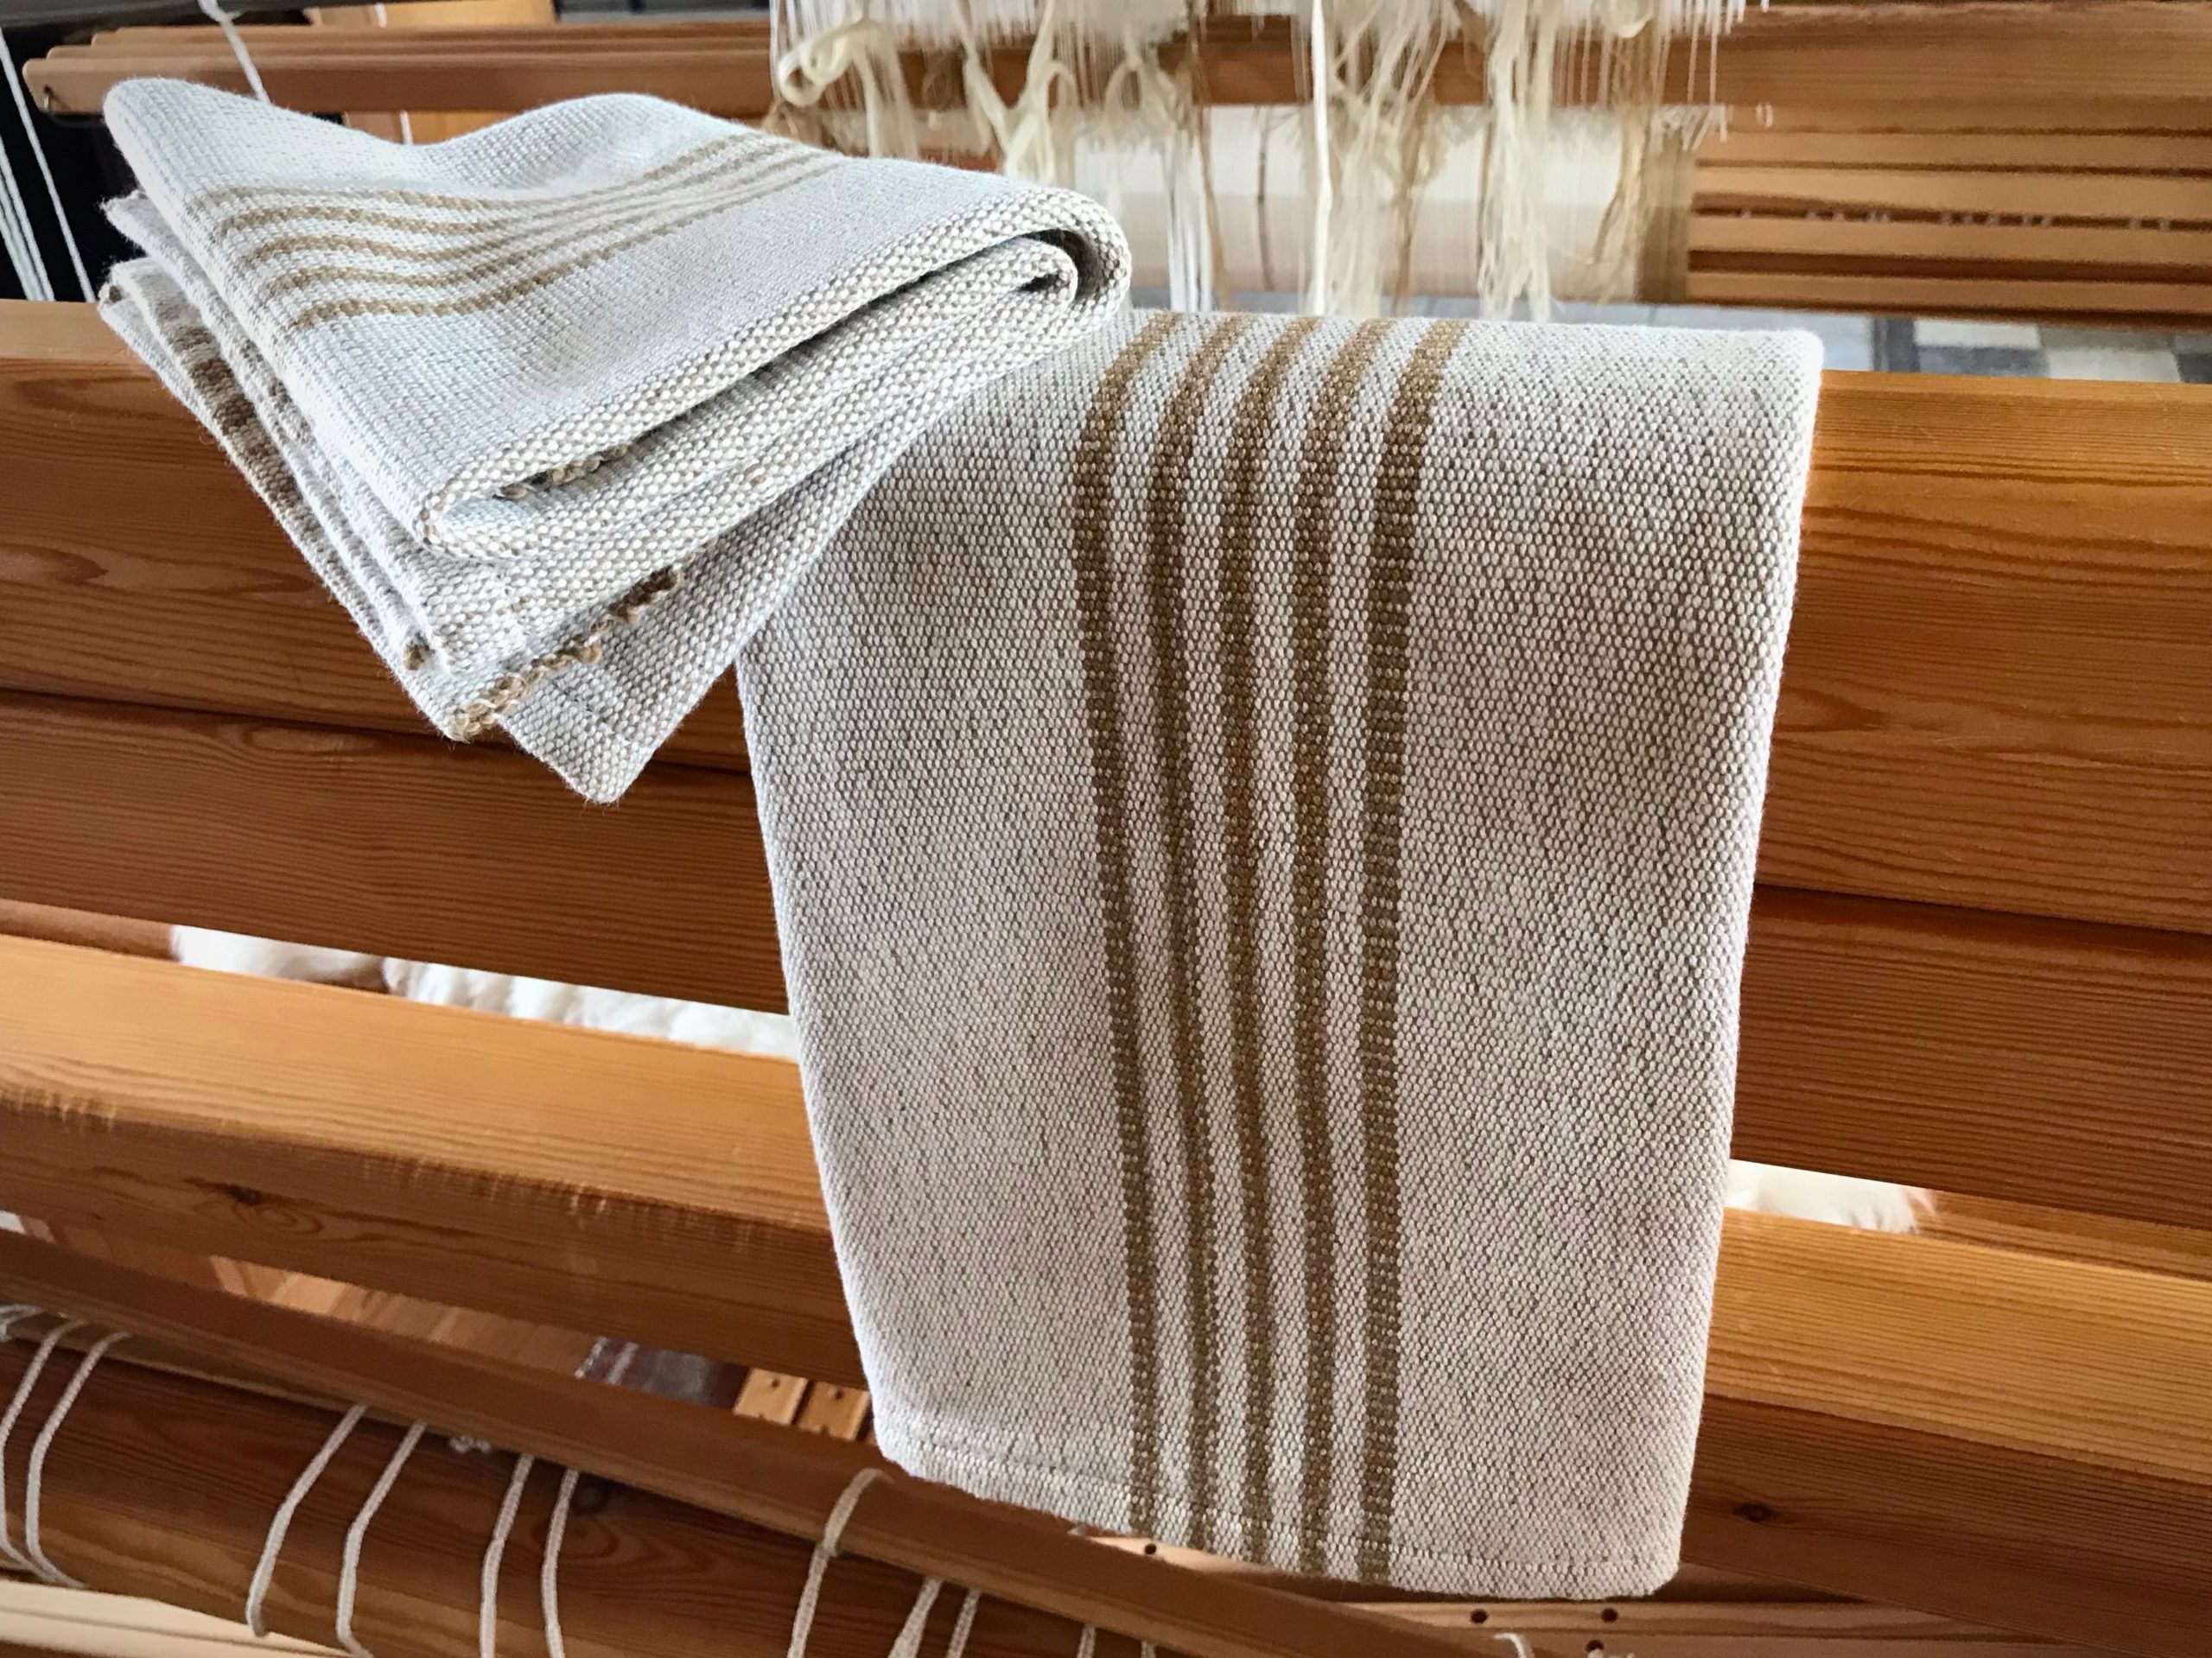 Natural Colored Cotton Dish Towels woven at Homestead Fiber Crafts.